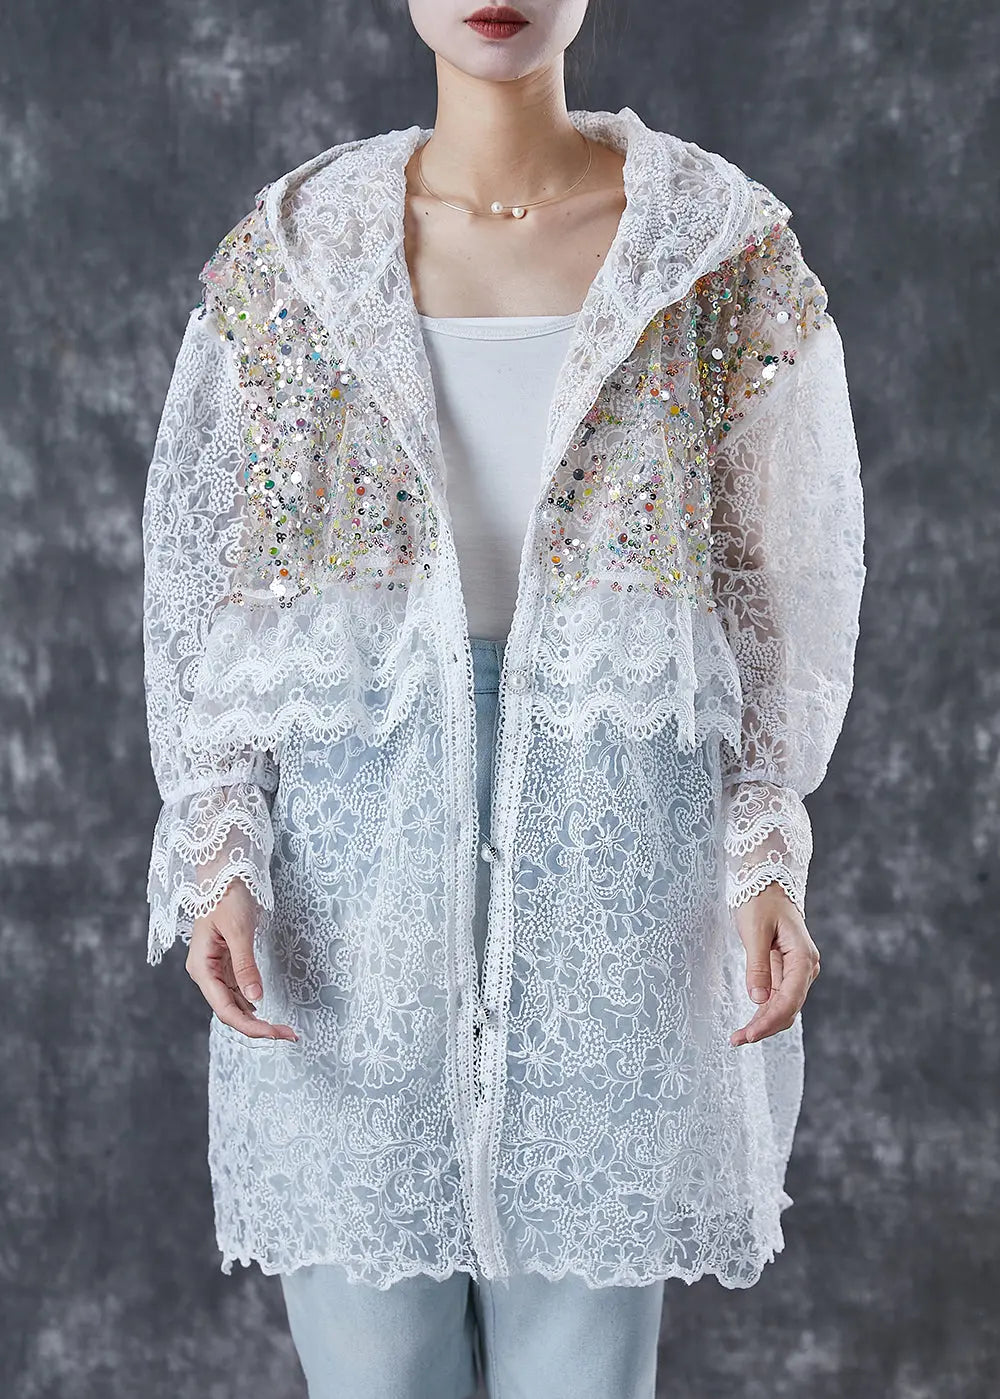 French White Sequins Hollow Out Lace Jackets Spring Ada Fashion